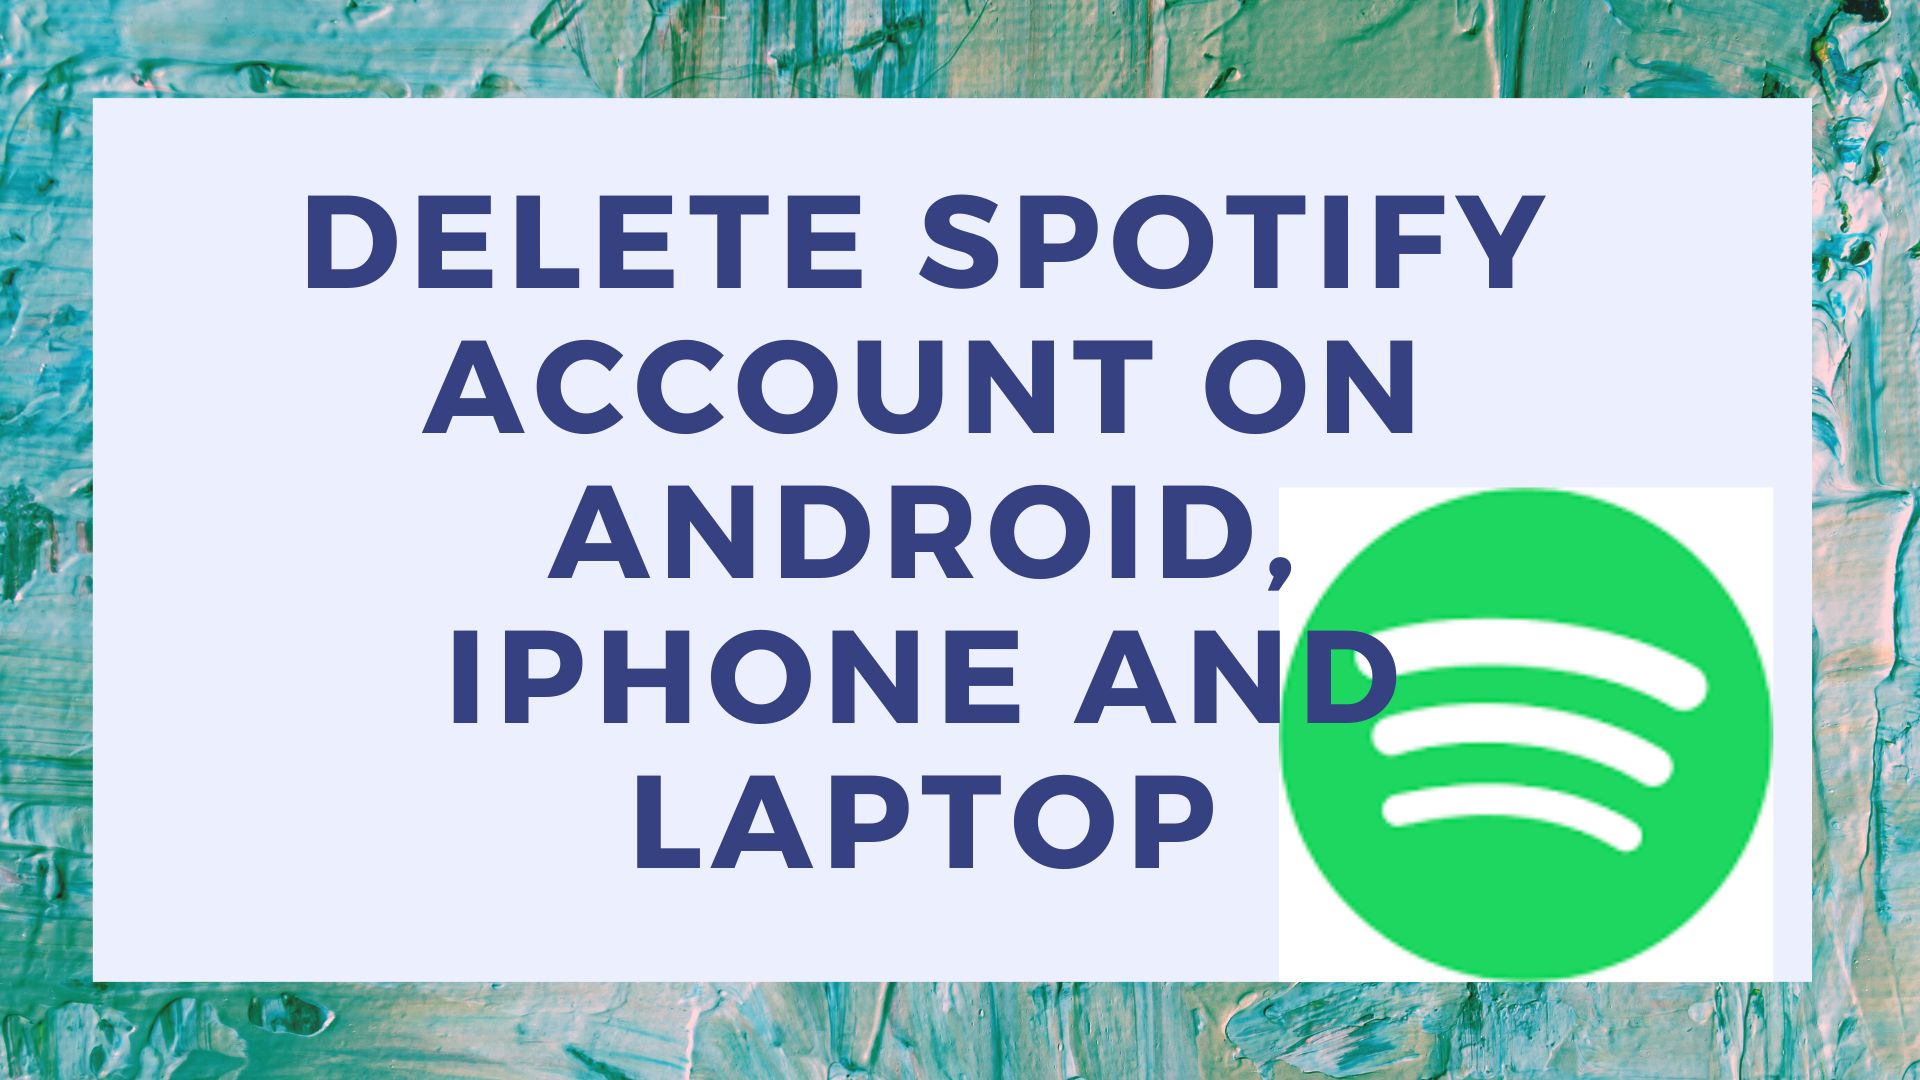 Delete Spotify Account on Android, iPhone and Laptop